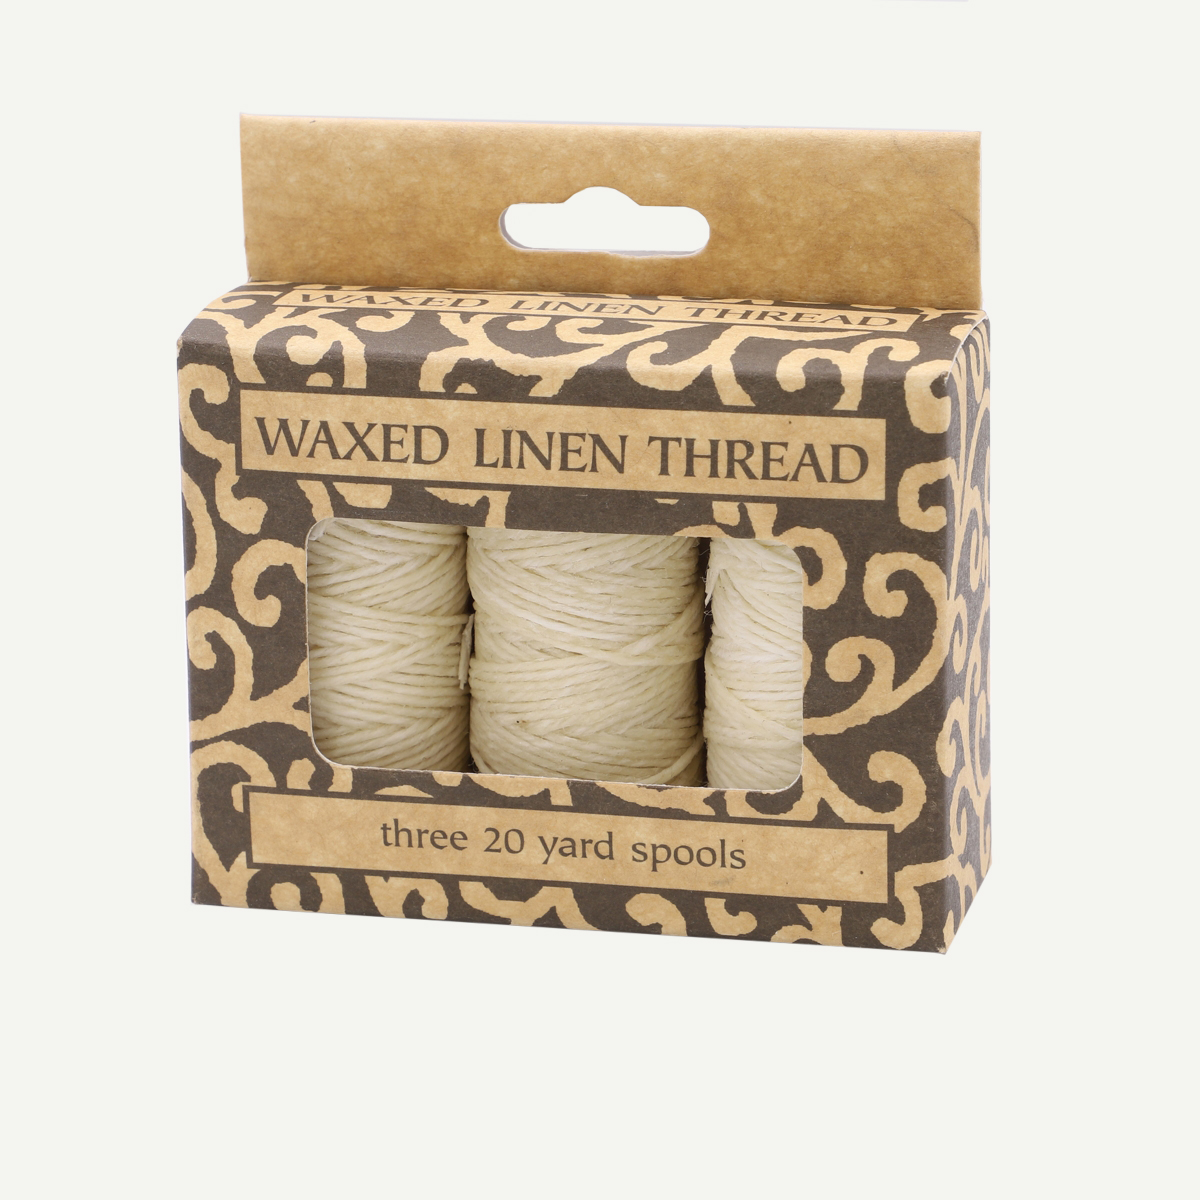 Lineco Waxed Genuine Linen Thread, 20 Yards, Pack of 3 Spools